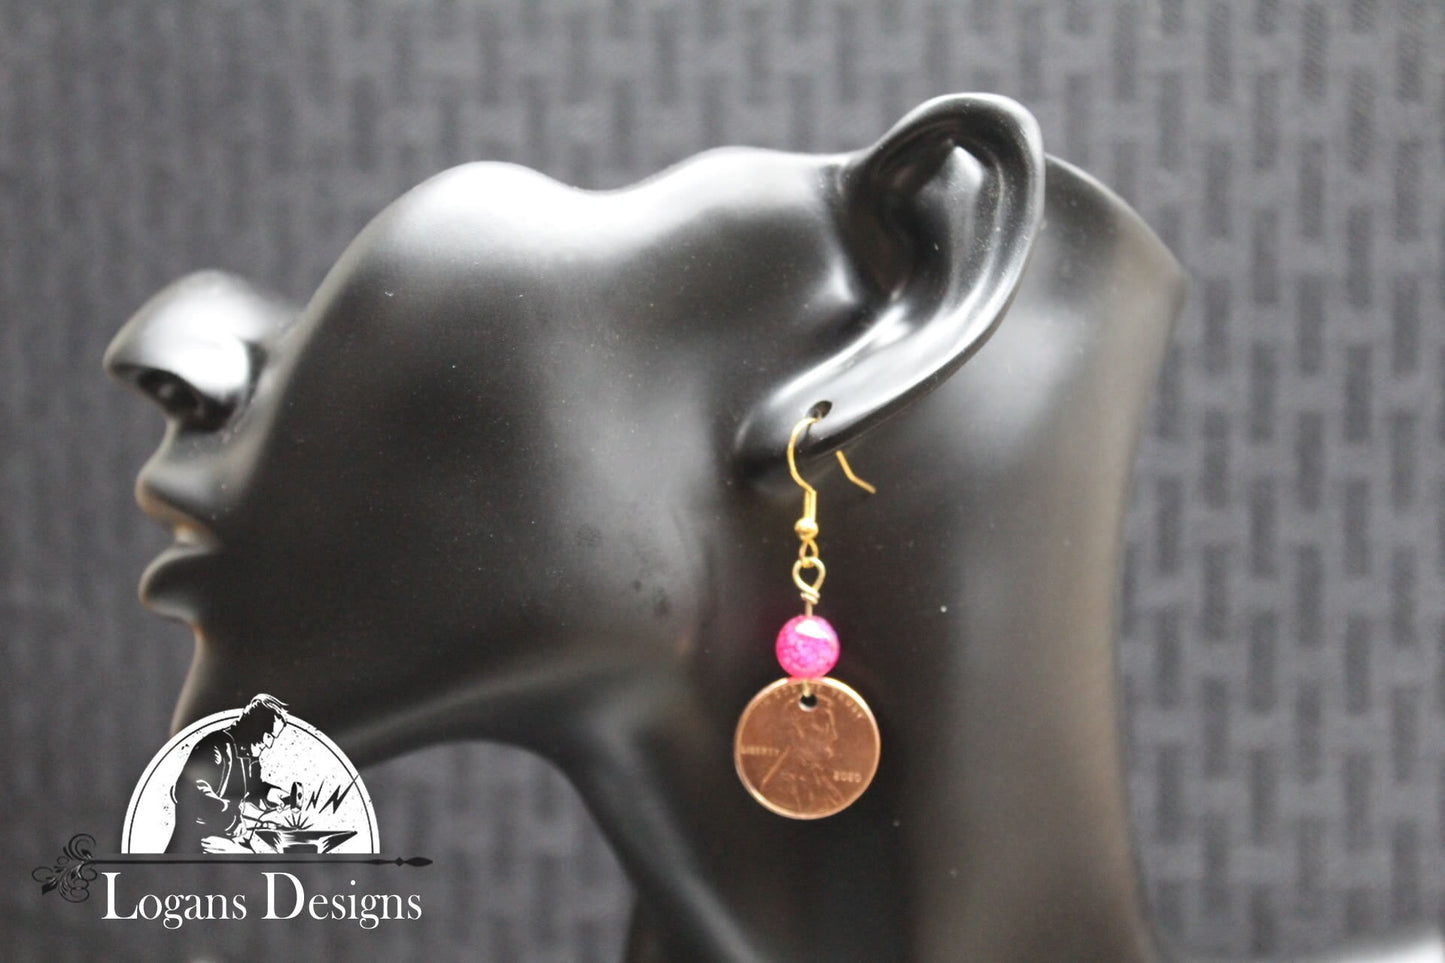 US Copper Penny | US Penny Earrings | Birthday Gift | Coin Jewelry | Penny Jewelry Unique Gift L8082